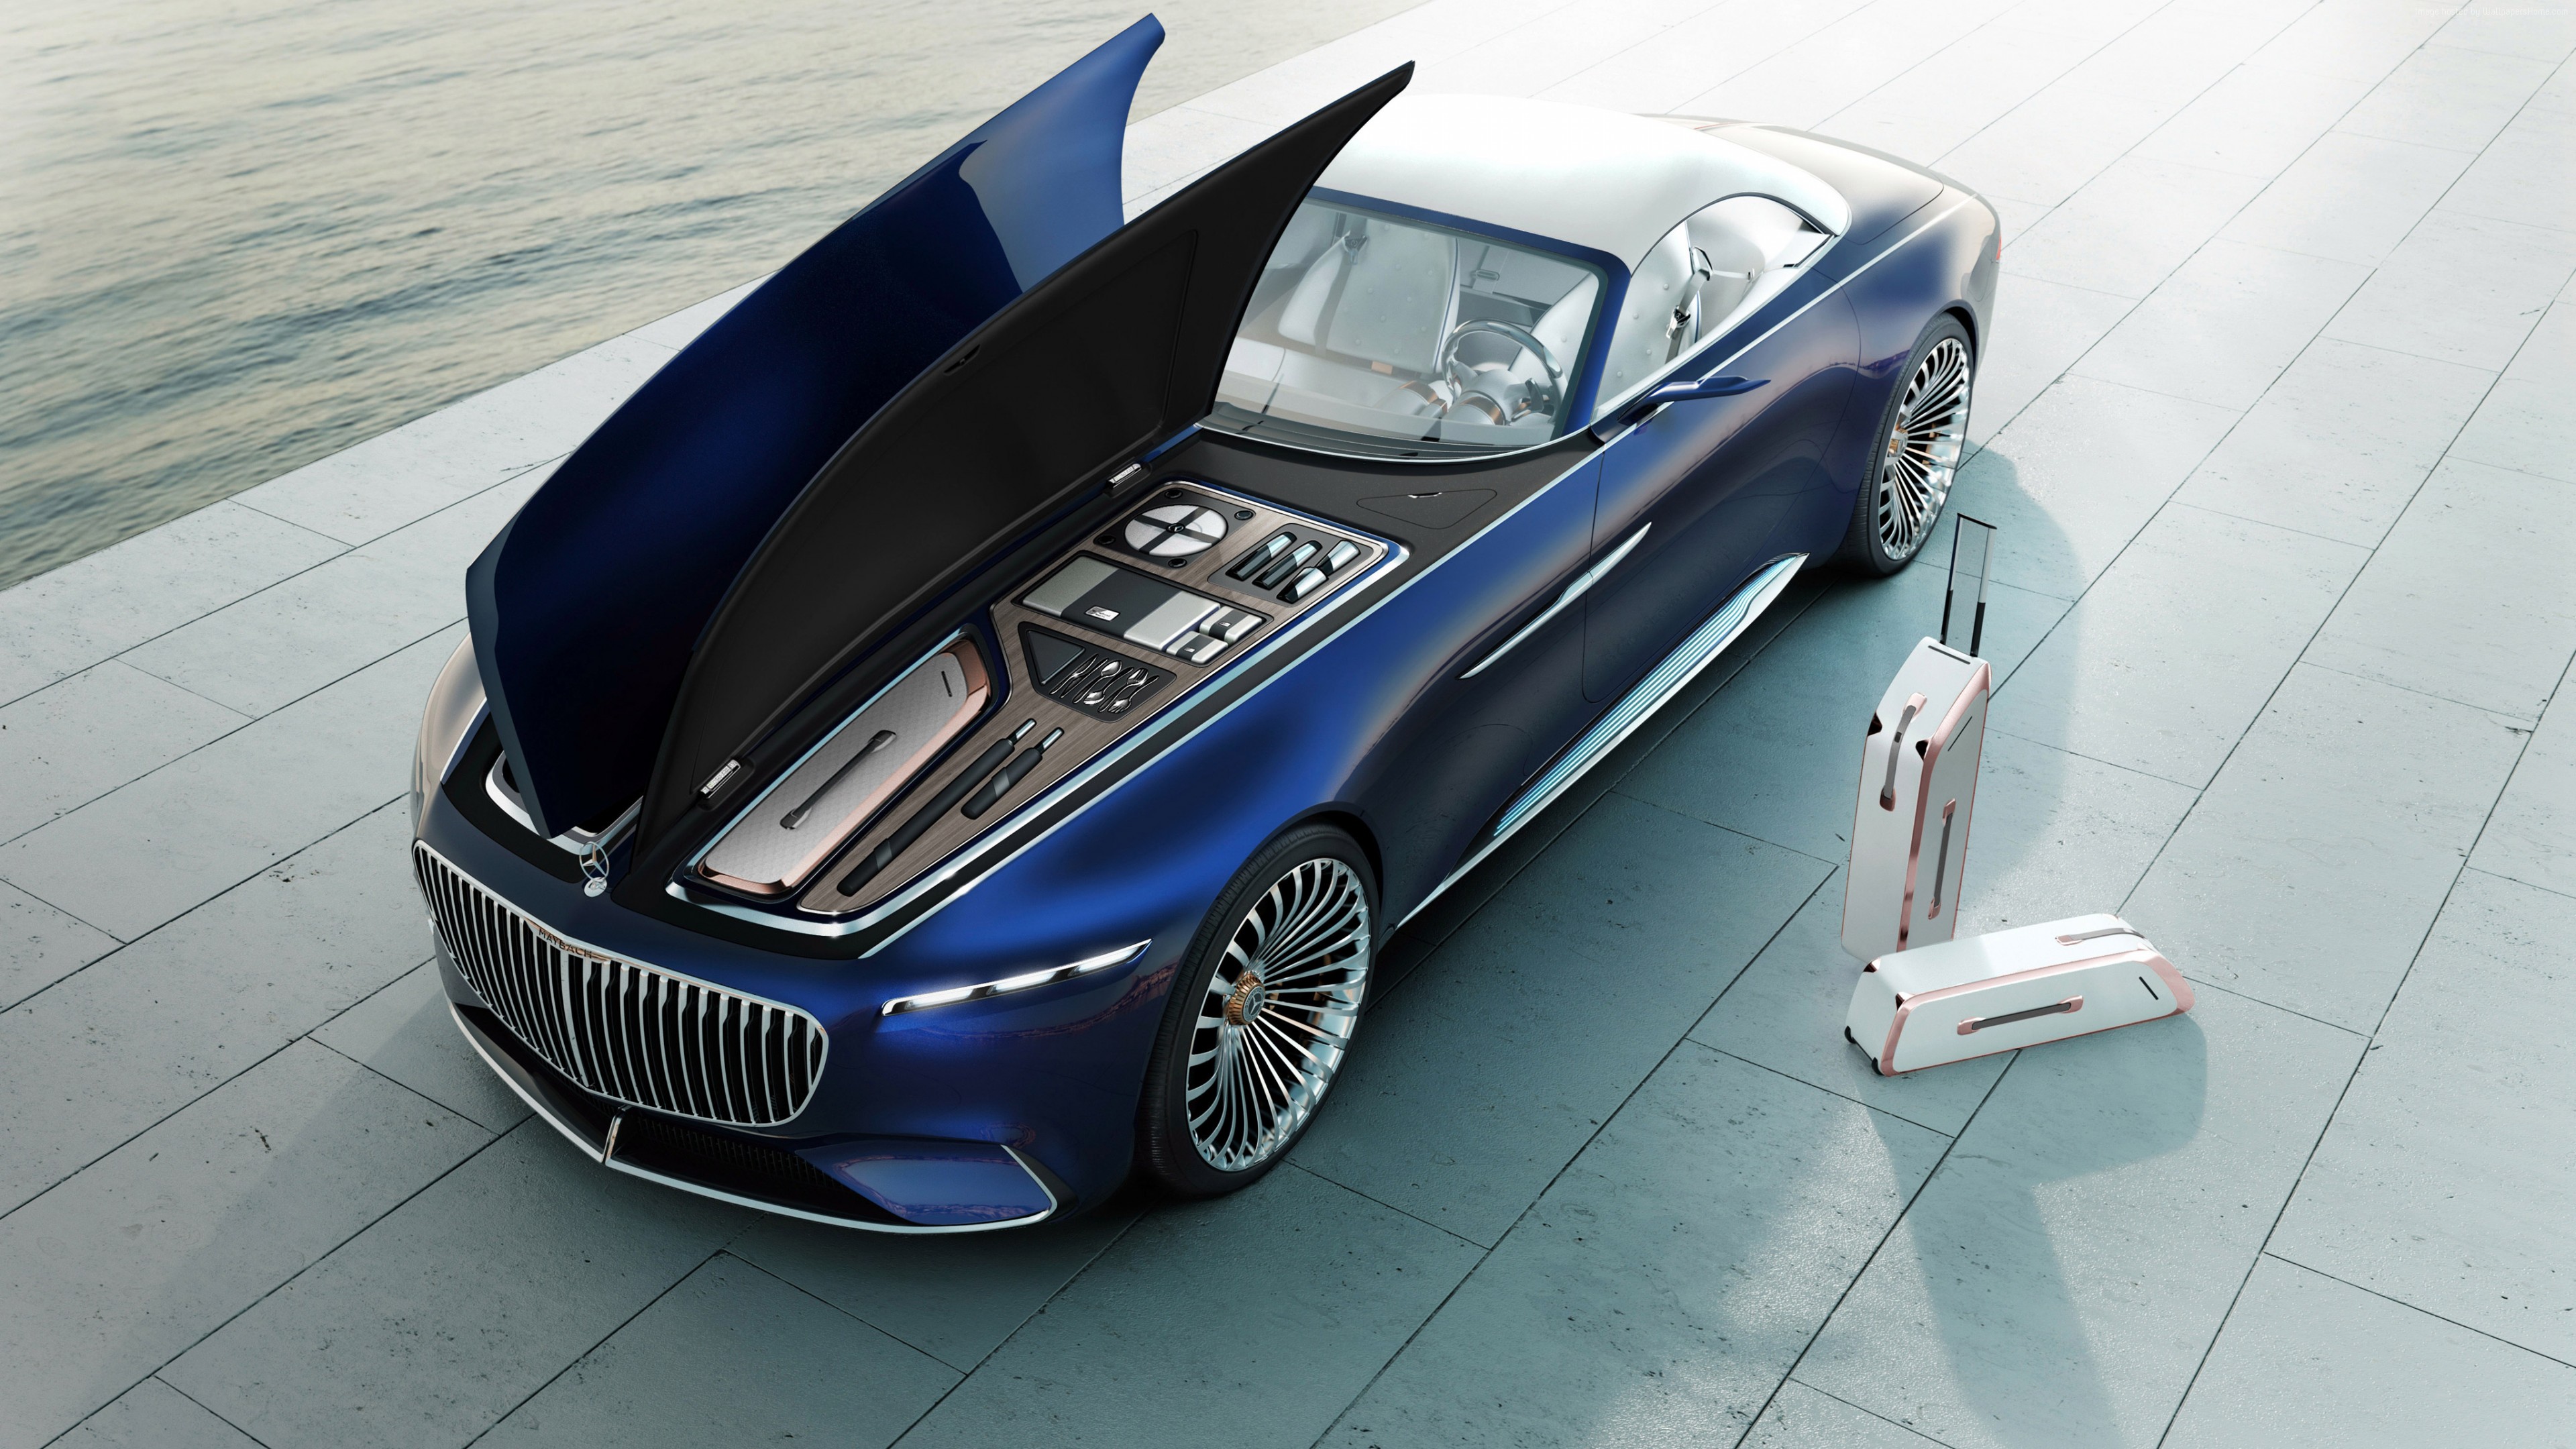 Mercedes electric car Wallpaper and Free. Visual